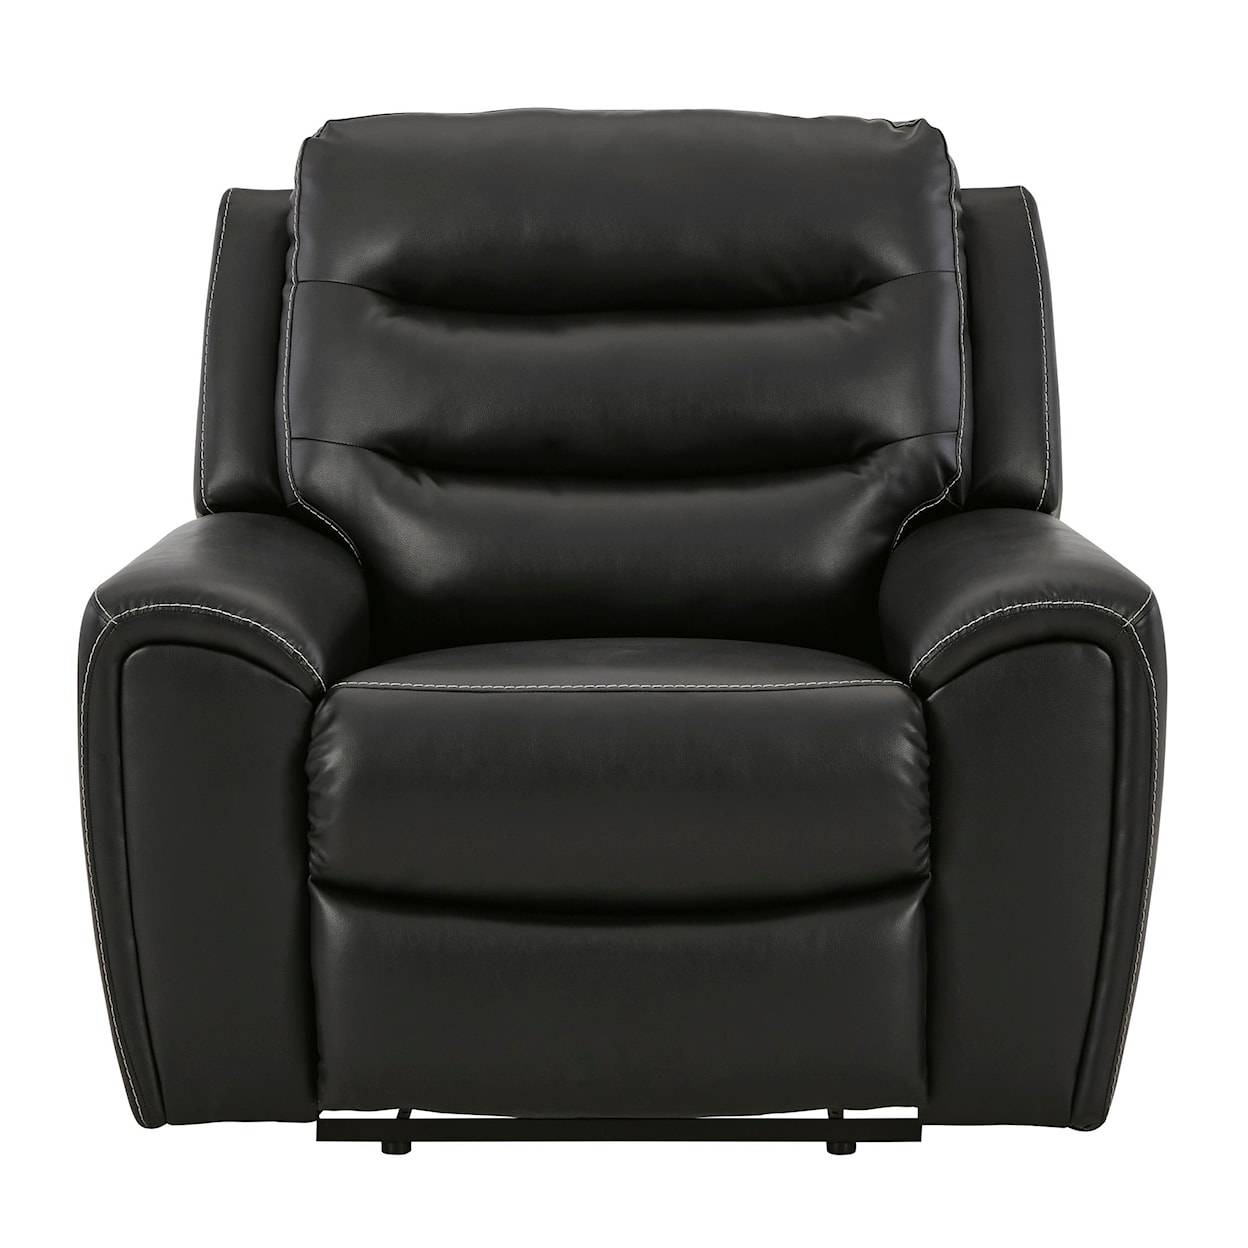 Signature Design by Ashley Warlin Power Recliner